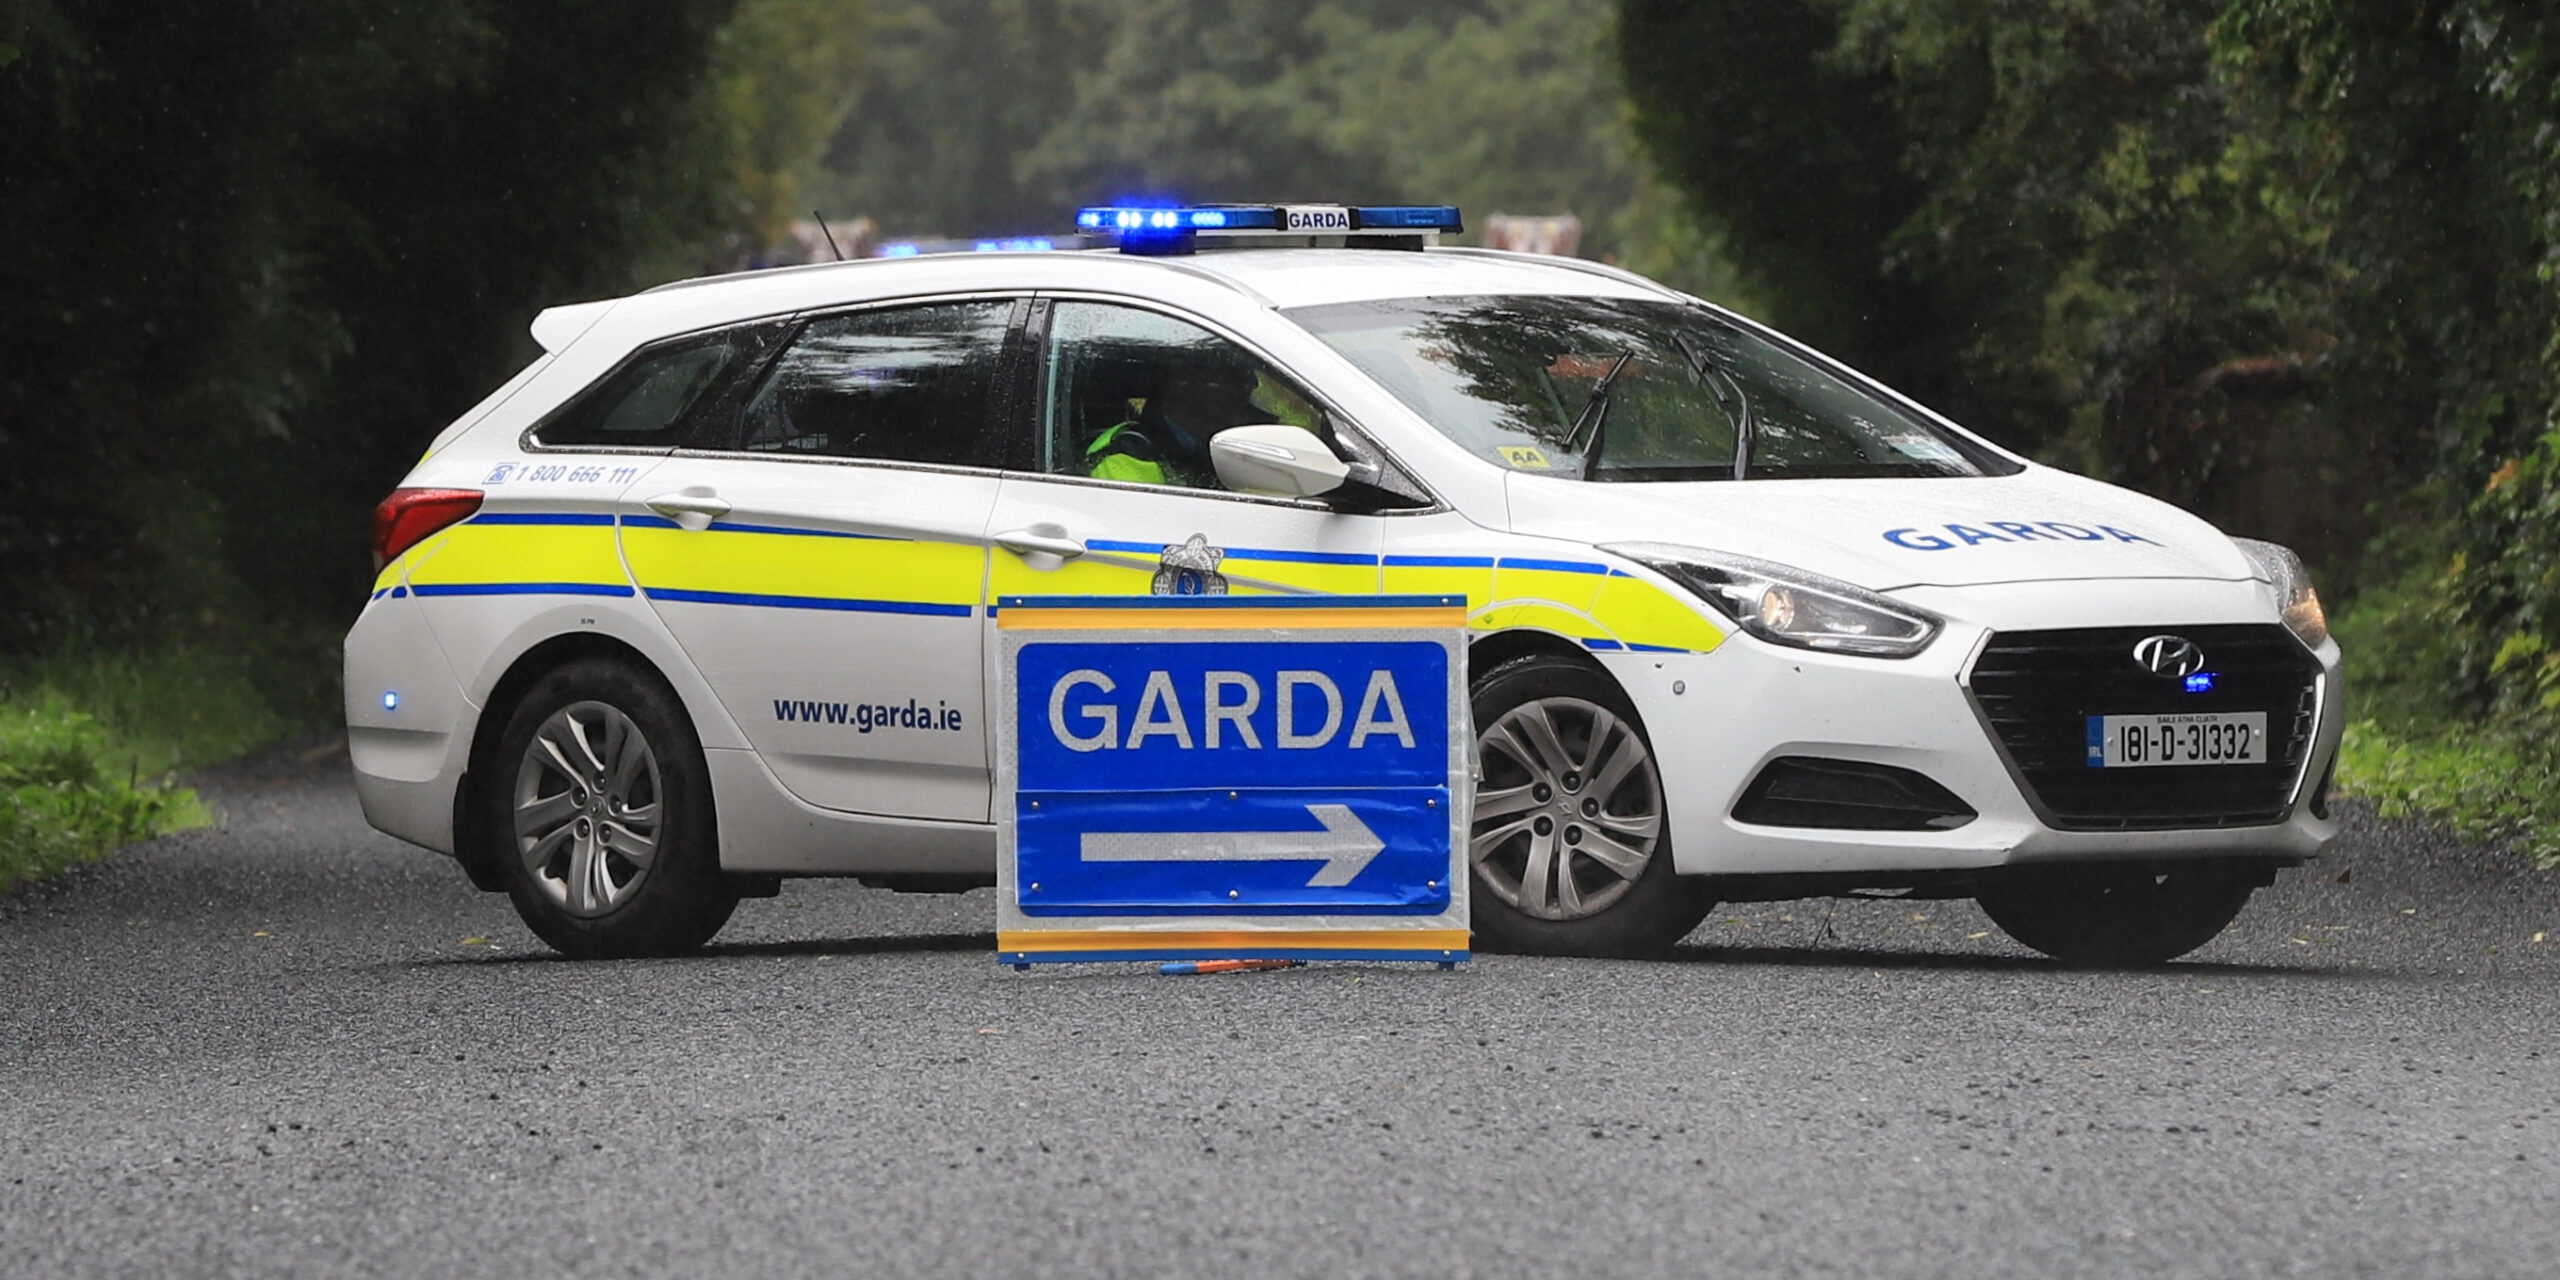 Gardaí appeal after cyclist seriously injured in crash with motorist